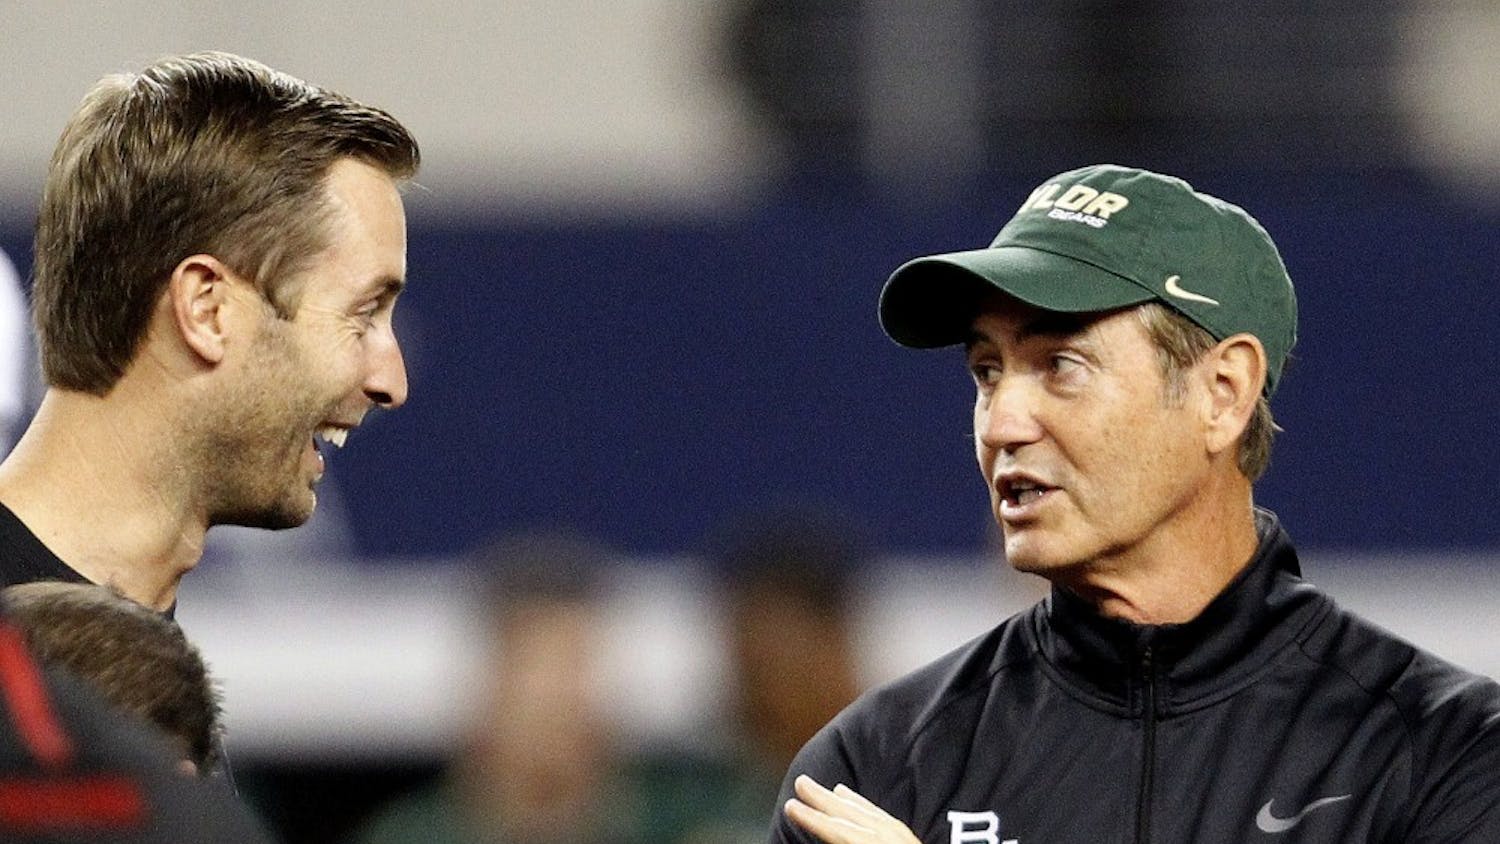 Head Coach Kliff Kingbury, left, of the Texas Tech Red Raiders and Head Coach Art Briles of the Baylor Bears meet on the field before their game at AT&T Stadium in Arlington, Texas, on Saturday, November 16, 2013. (Ron Jenkins/Fort Worth Star-Telegram/MCT)